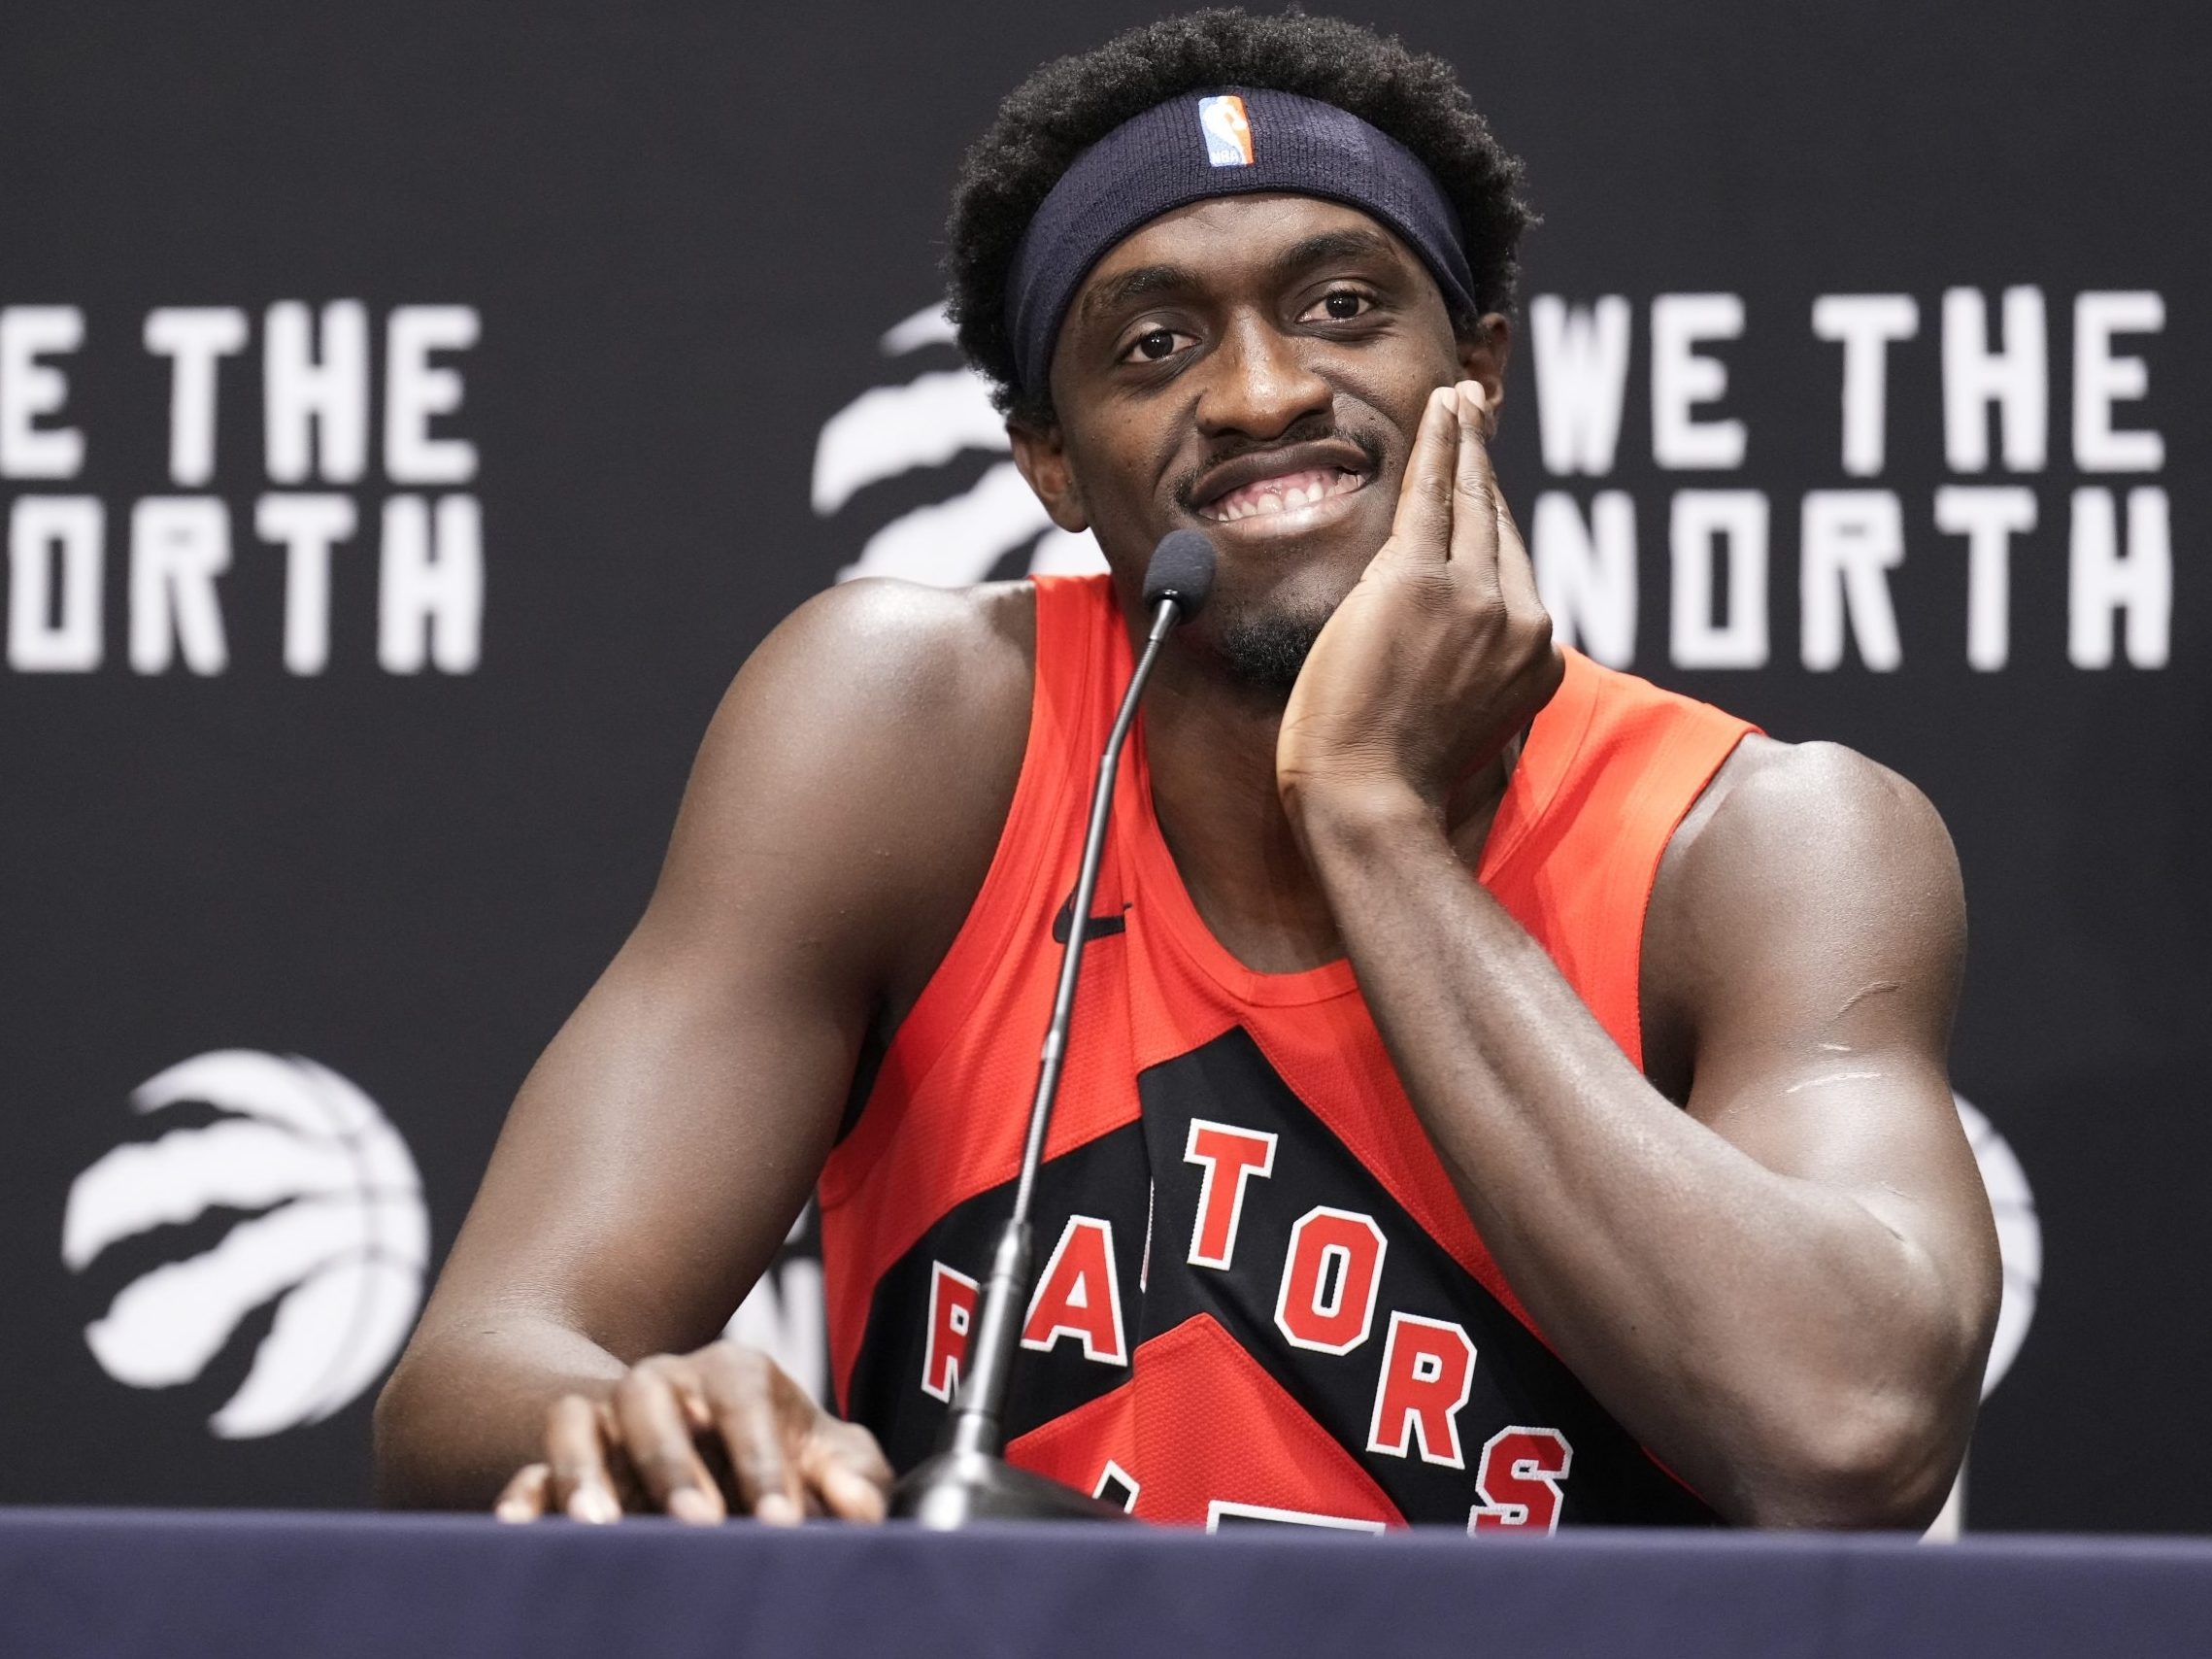 Outraged Raptors fans want to start a petition to get better